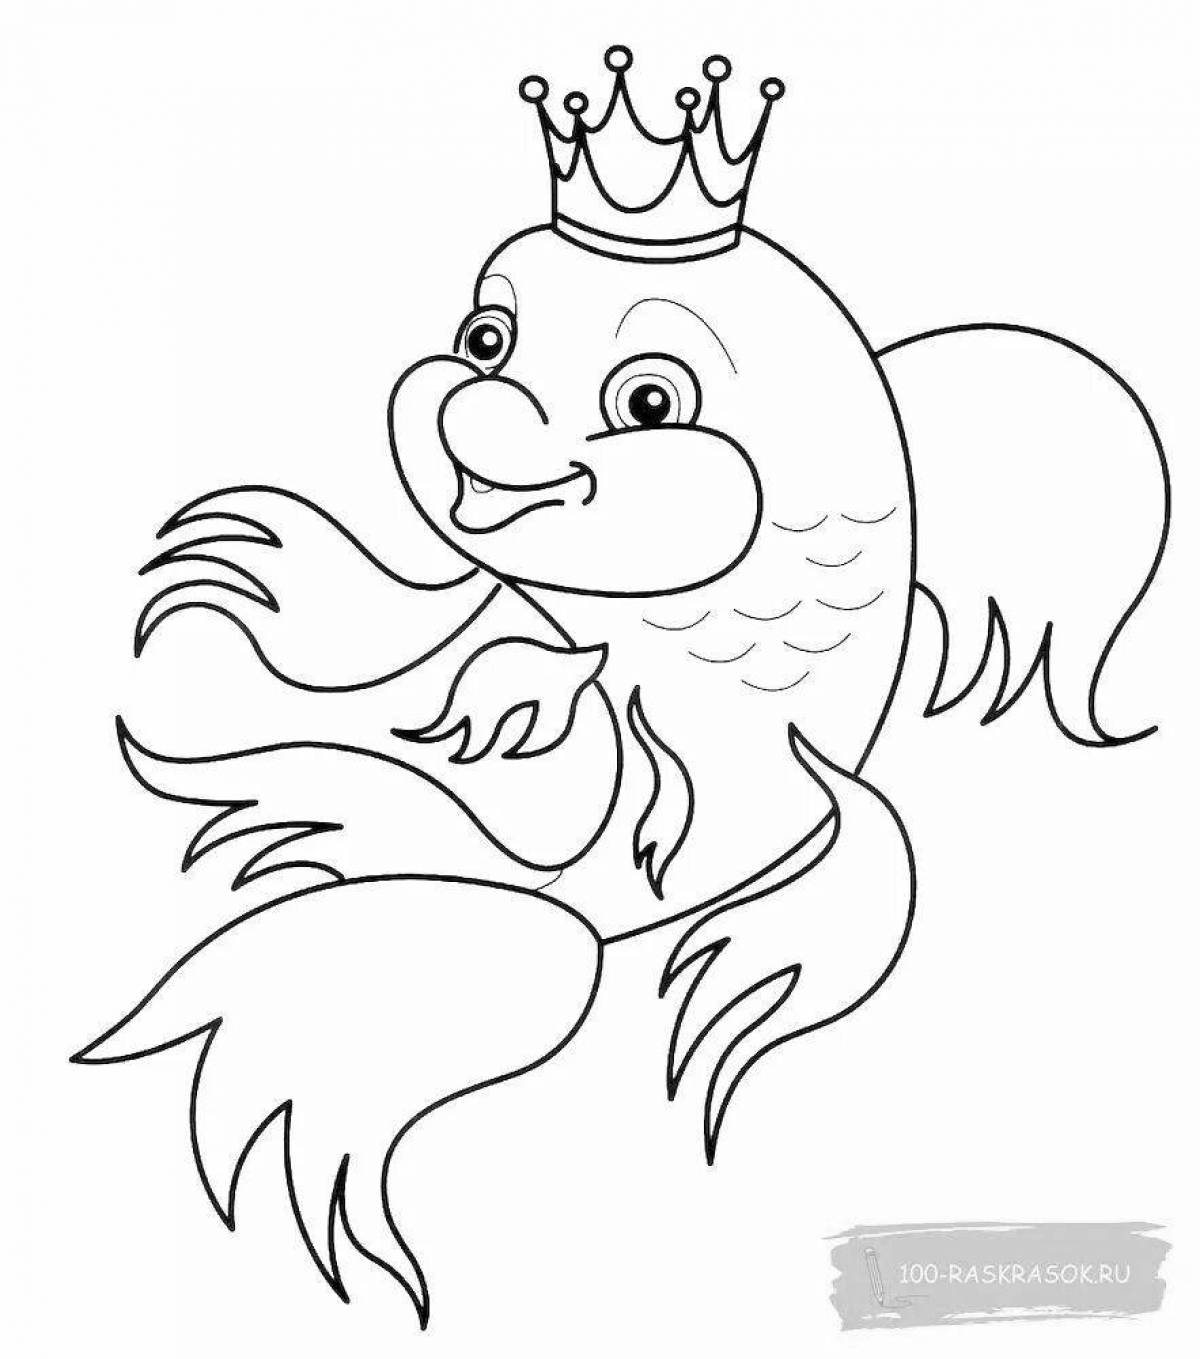 Great goldfish story coloring book